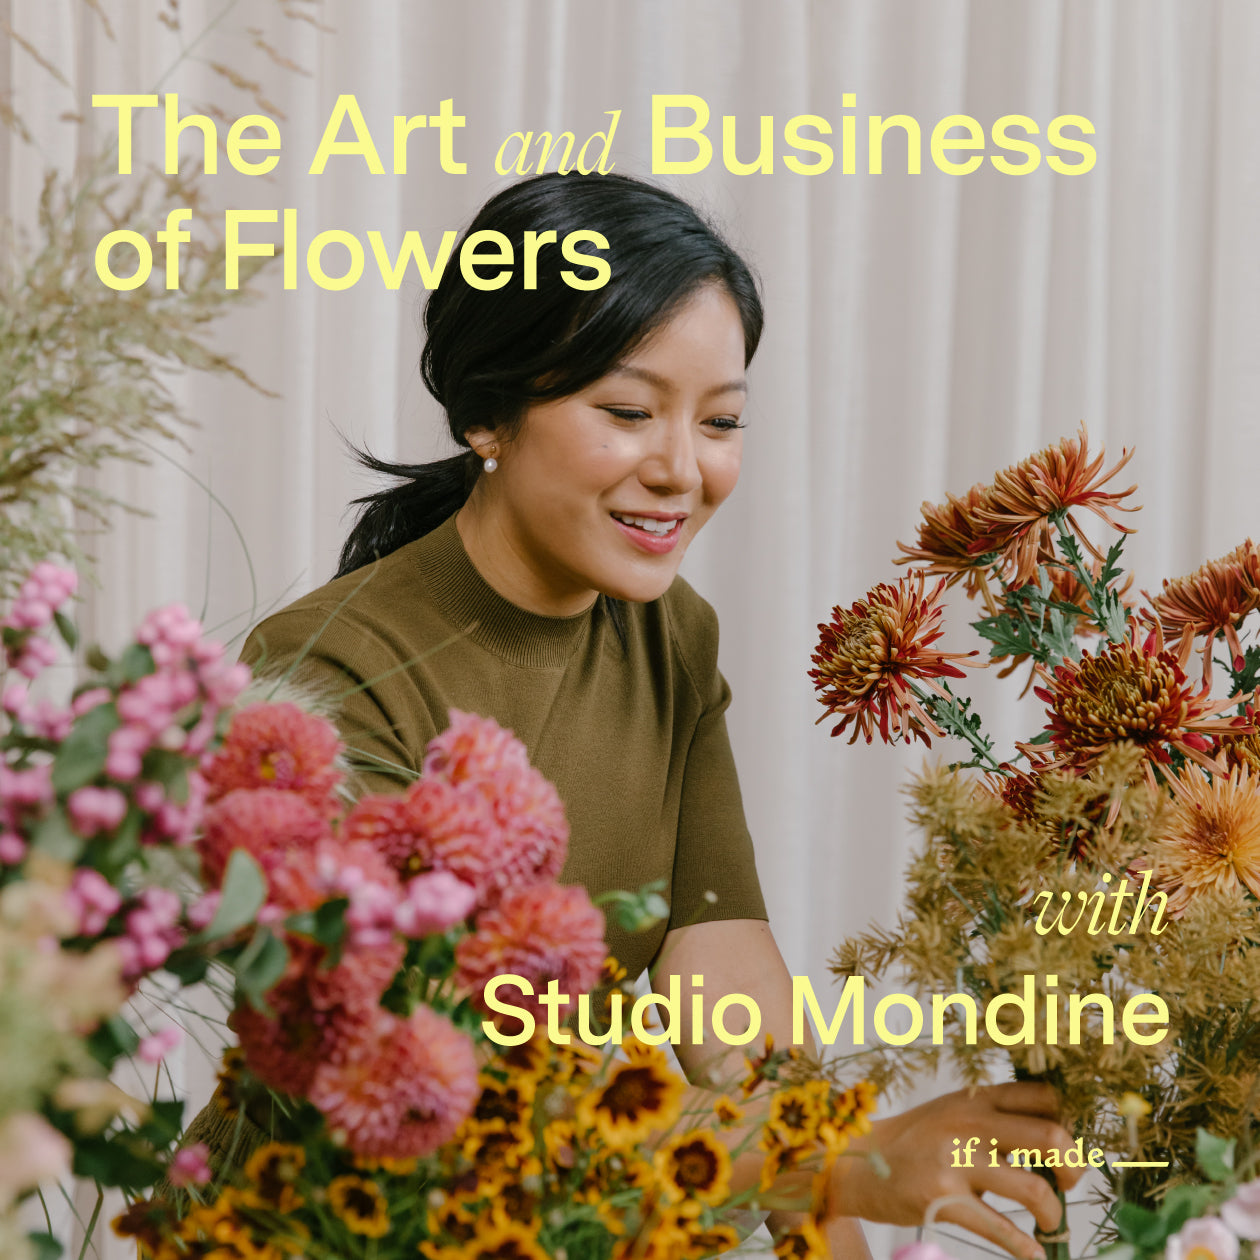 The Art and Business of Flowers with Studio Mondine (SPP0622) -  22 payments of $99